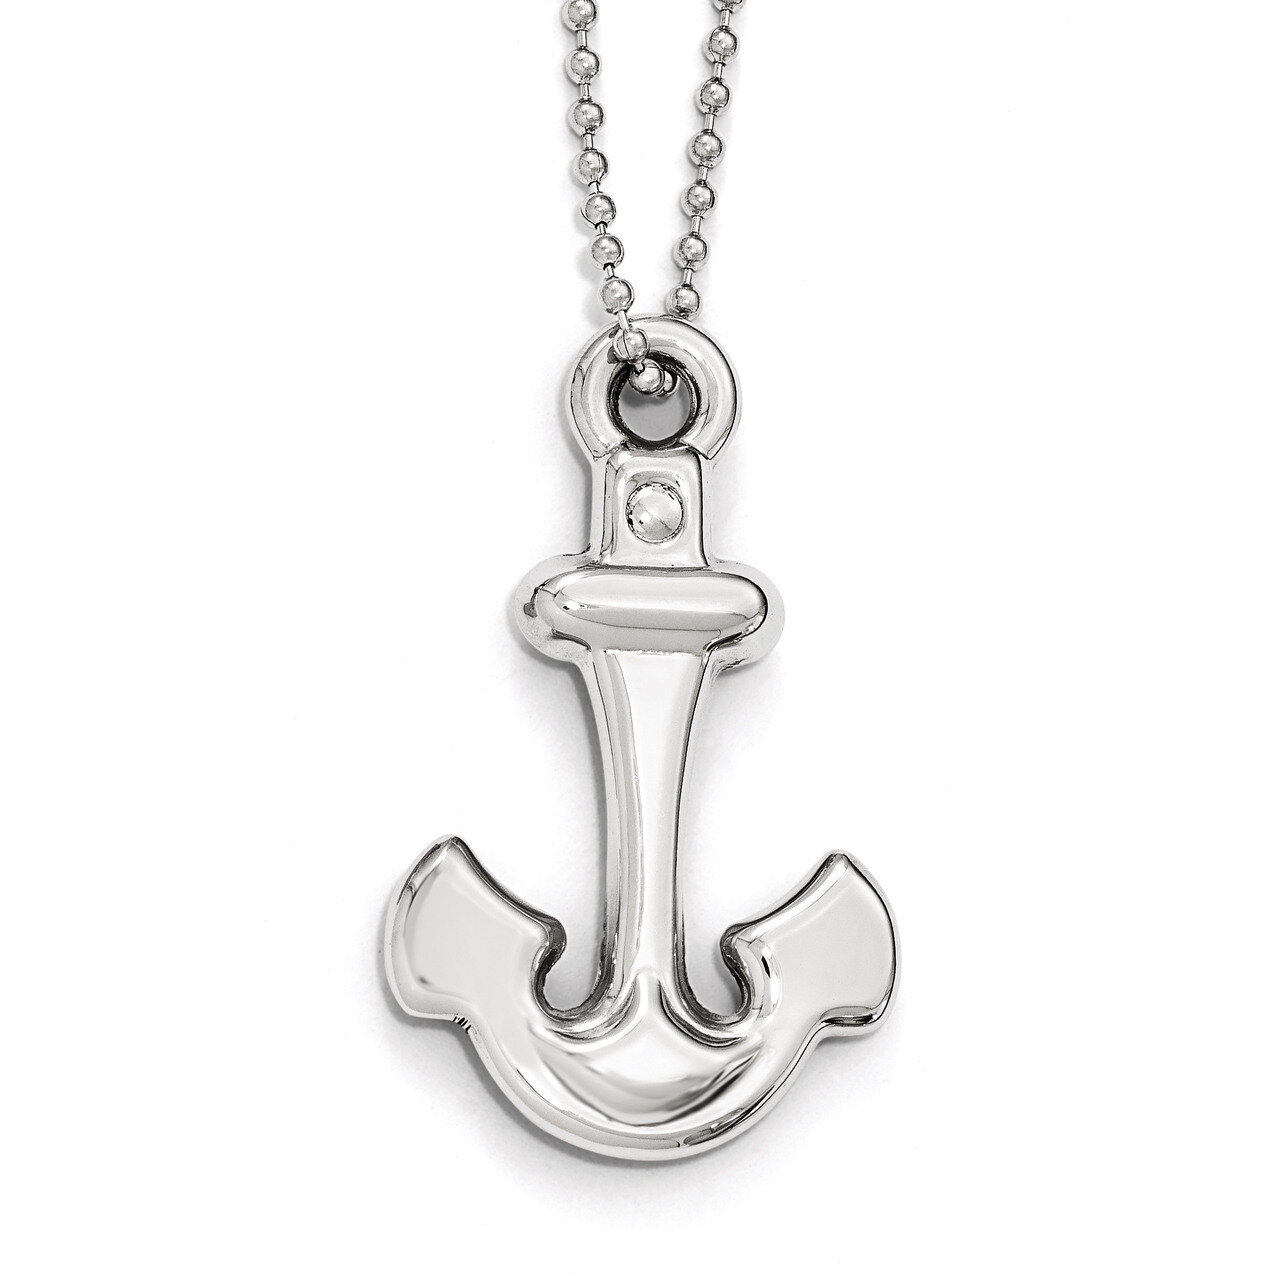 Polished Anchor Necklace - Stainless Steel SRN1816-22